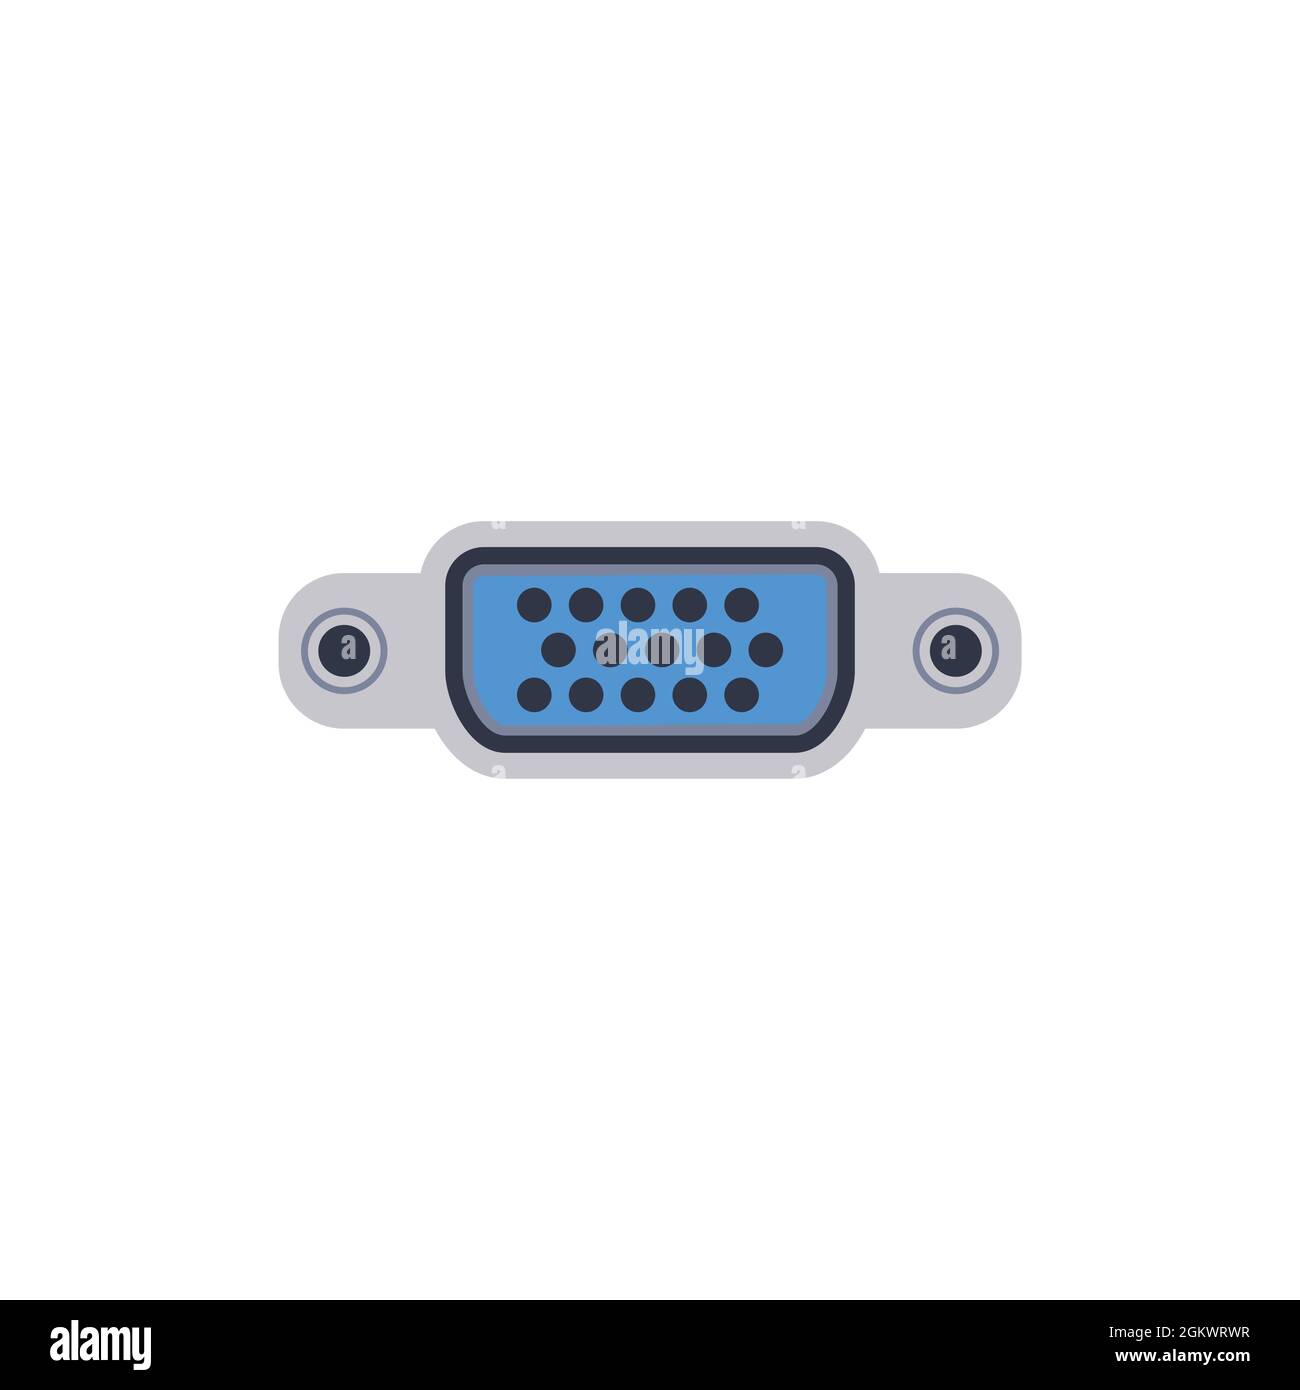 VGA pc universal connector icon. Vector graphic illustration of Port in flat style. USB type, video and audio port. Displayport and other computer int Stock Vector